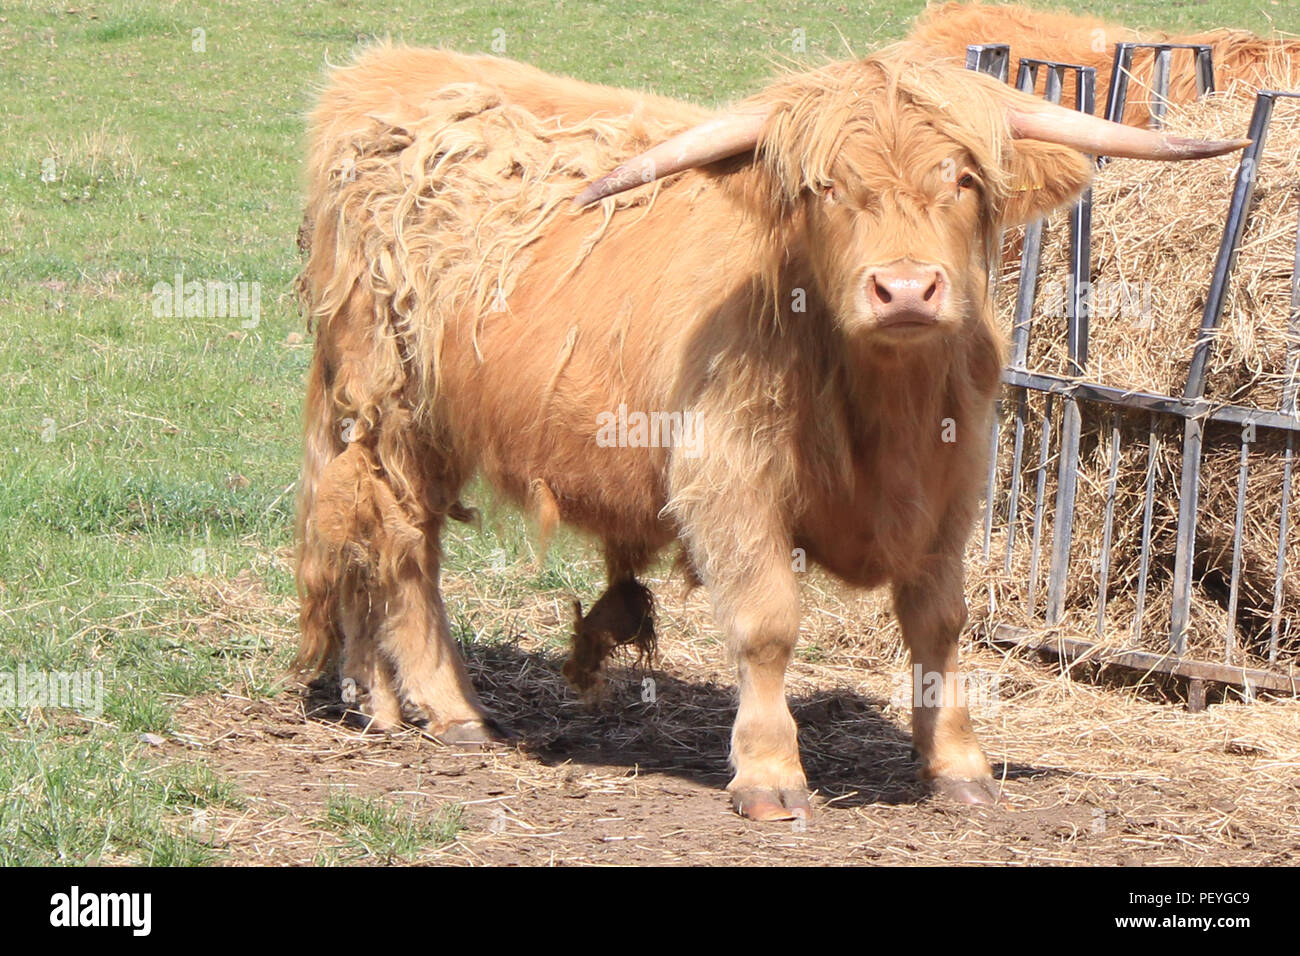 highland cow Inverness Stock Photo